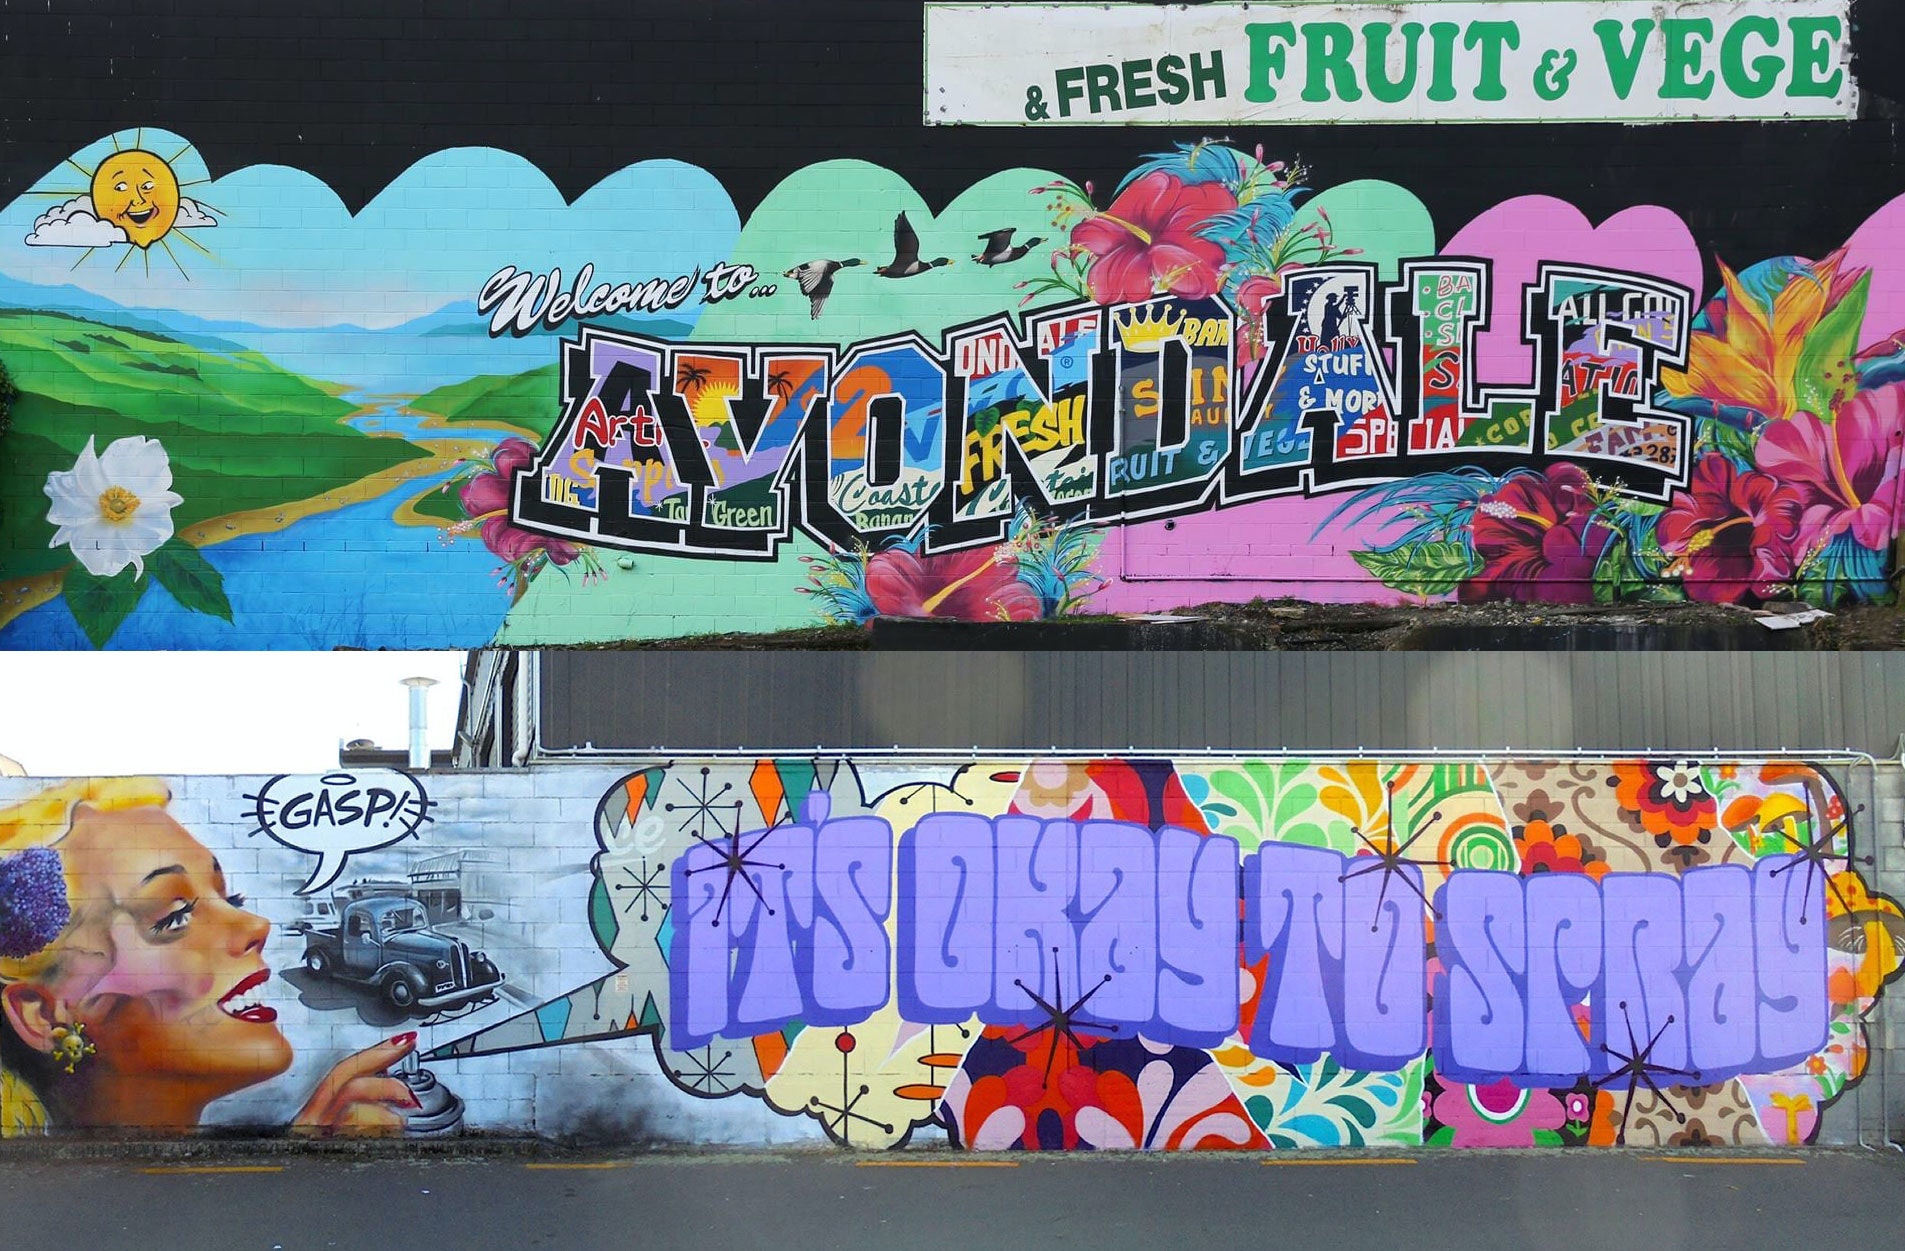 Murals by Gasp